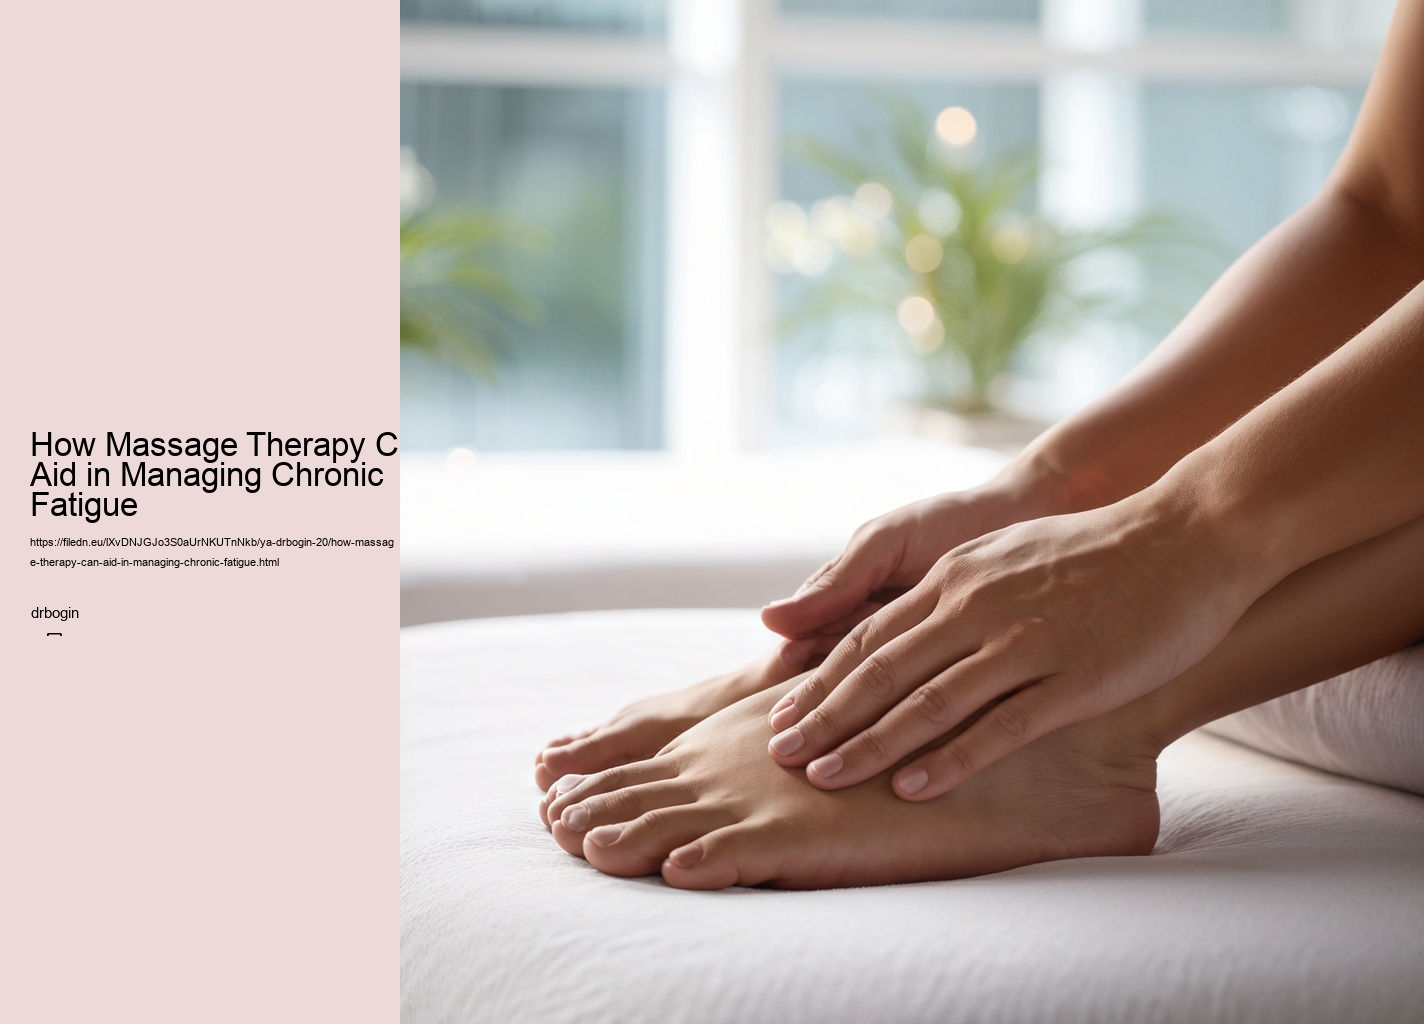 How Massage Therapy Can Aid in Managing Chronic Fatigue